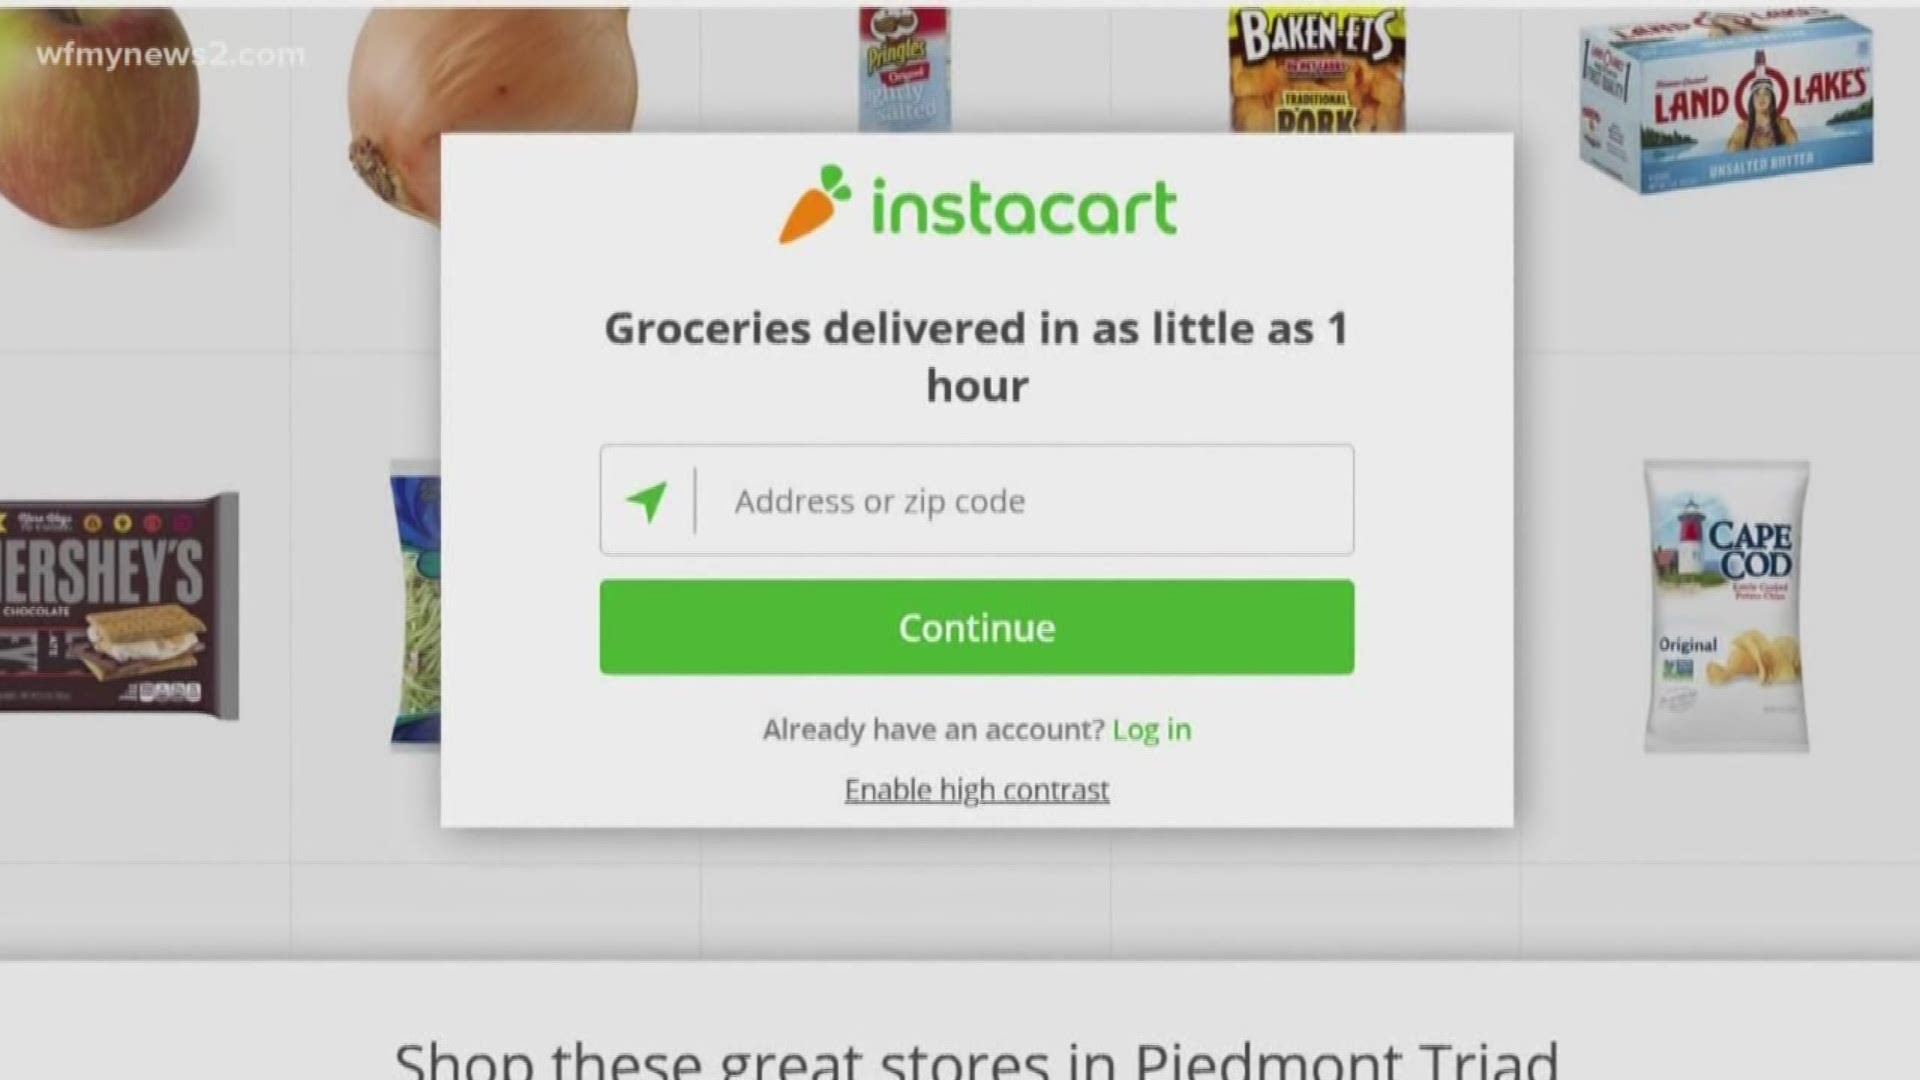 Ashley Smith got a message saying her Instacart order was "complete", but her groceries weren't at her doorstep.